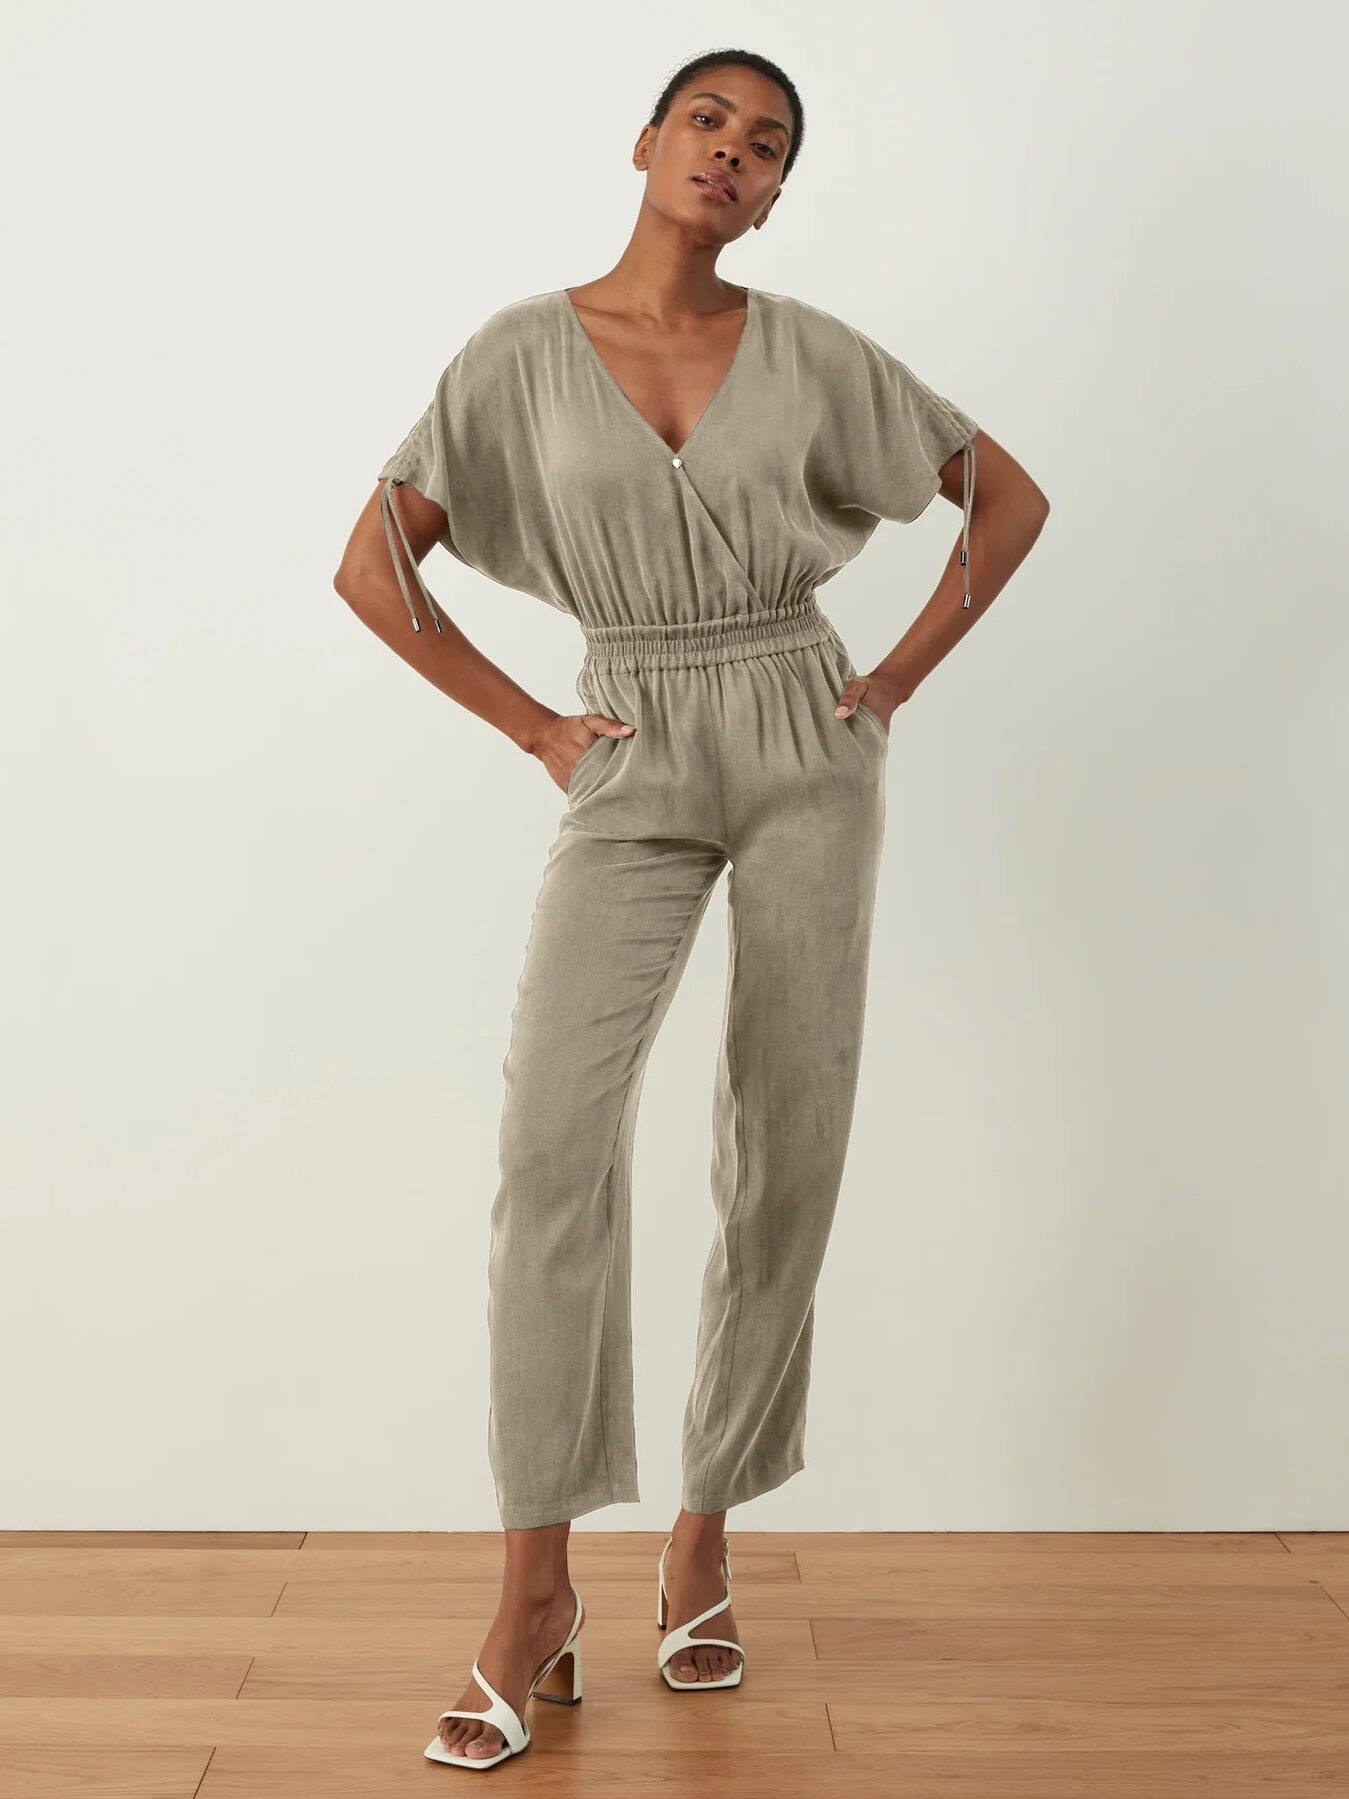 A woman stands confidently with her hands on her hips, wearing a grey jumpsuit and white heels, against a neutral background.